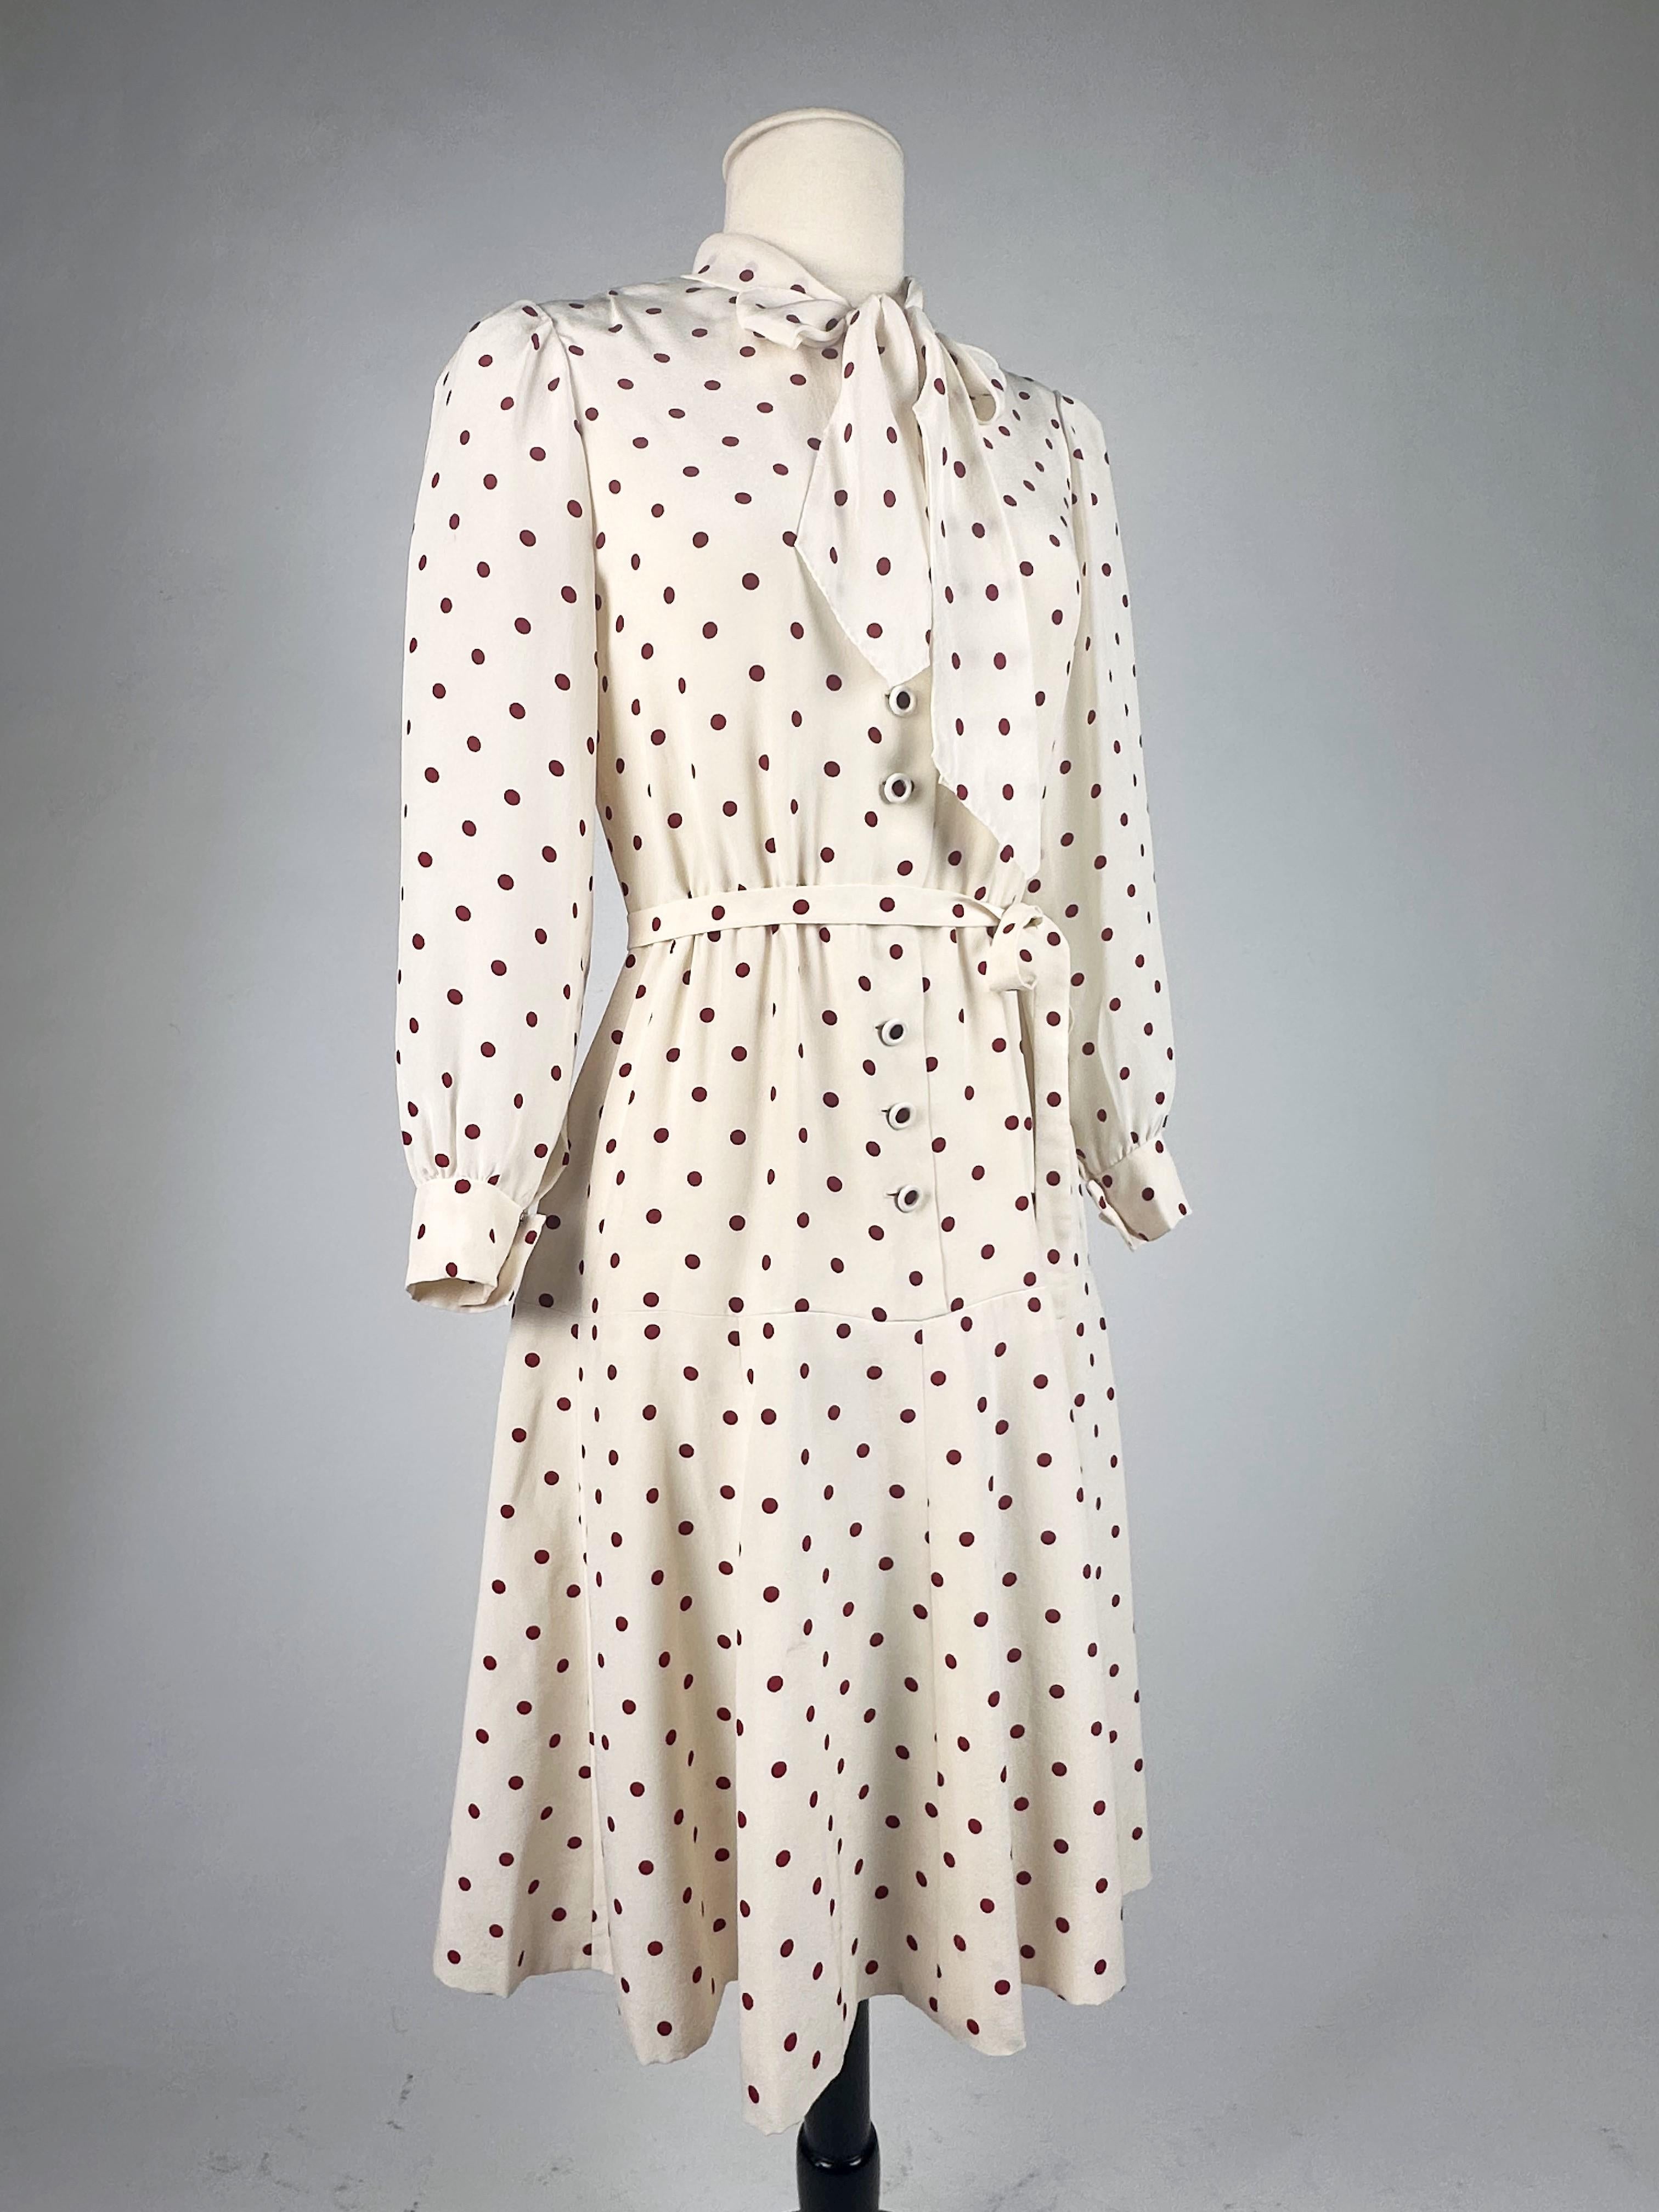 A Polka Dots crepe cocktail dress by Chanel Haute Couture numbered 59644 C. 1975 For Sale 4